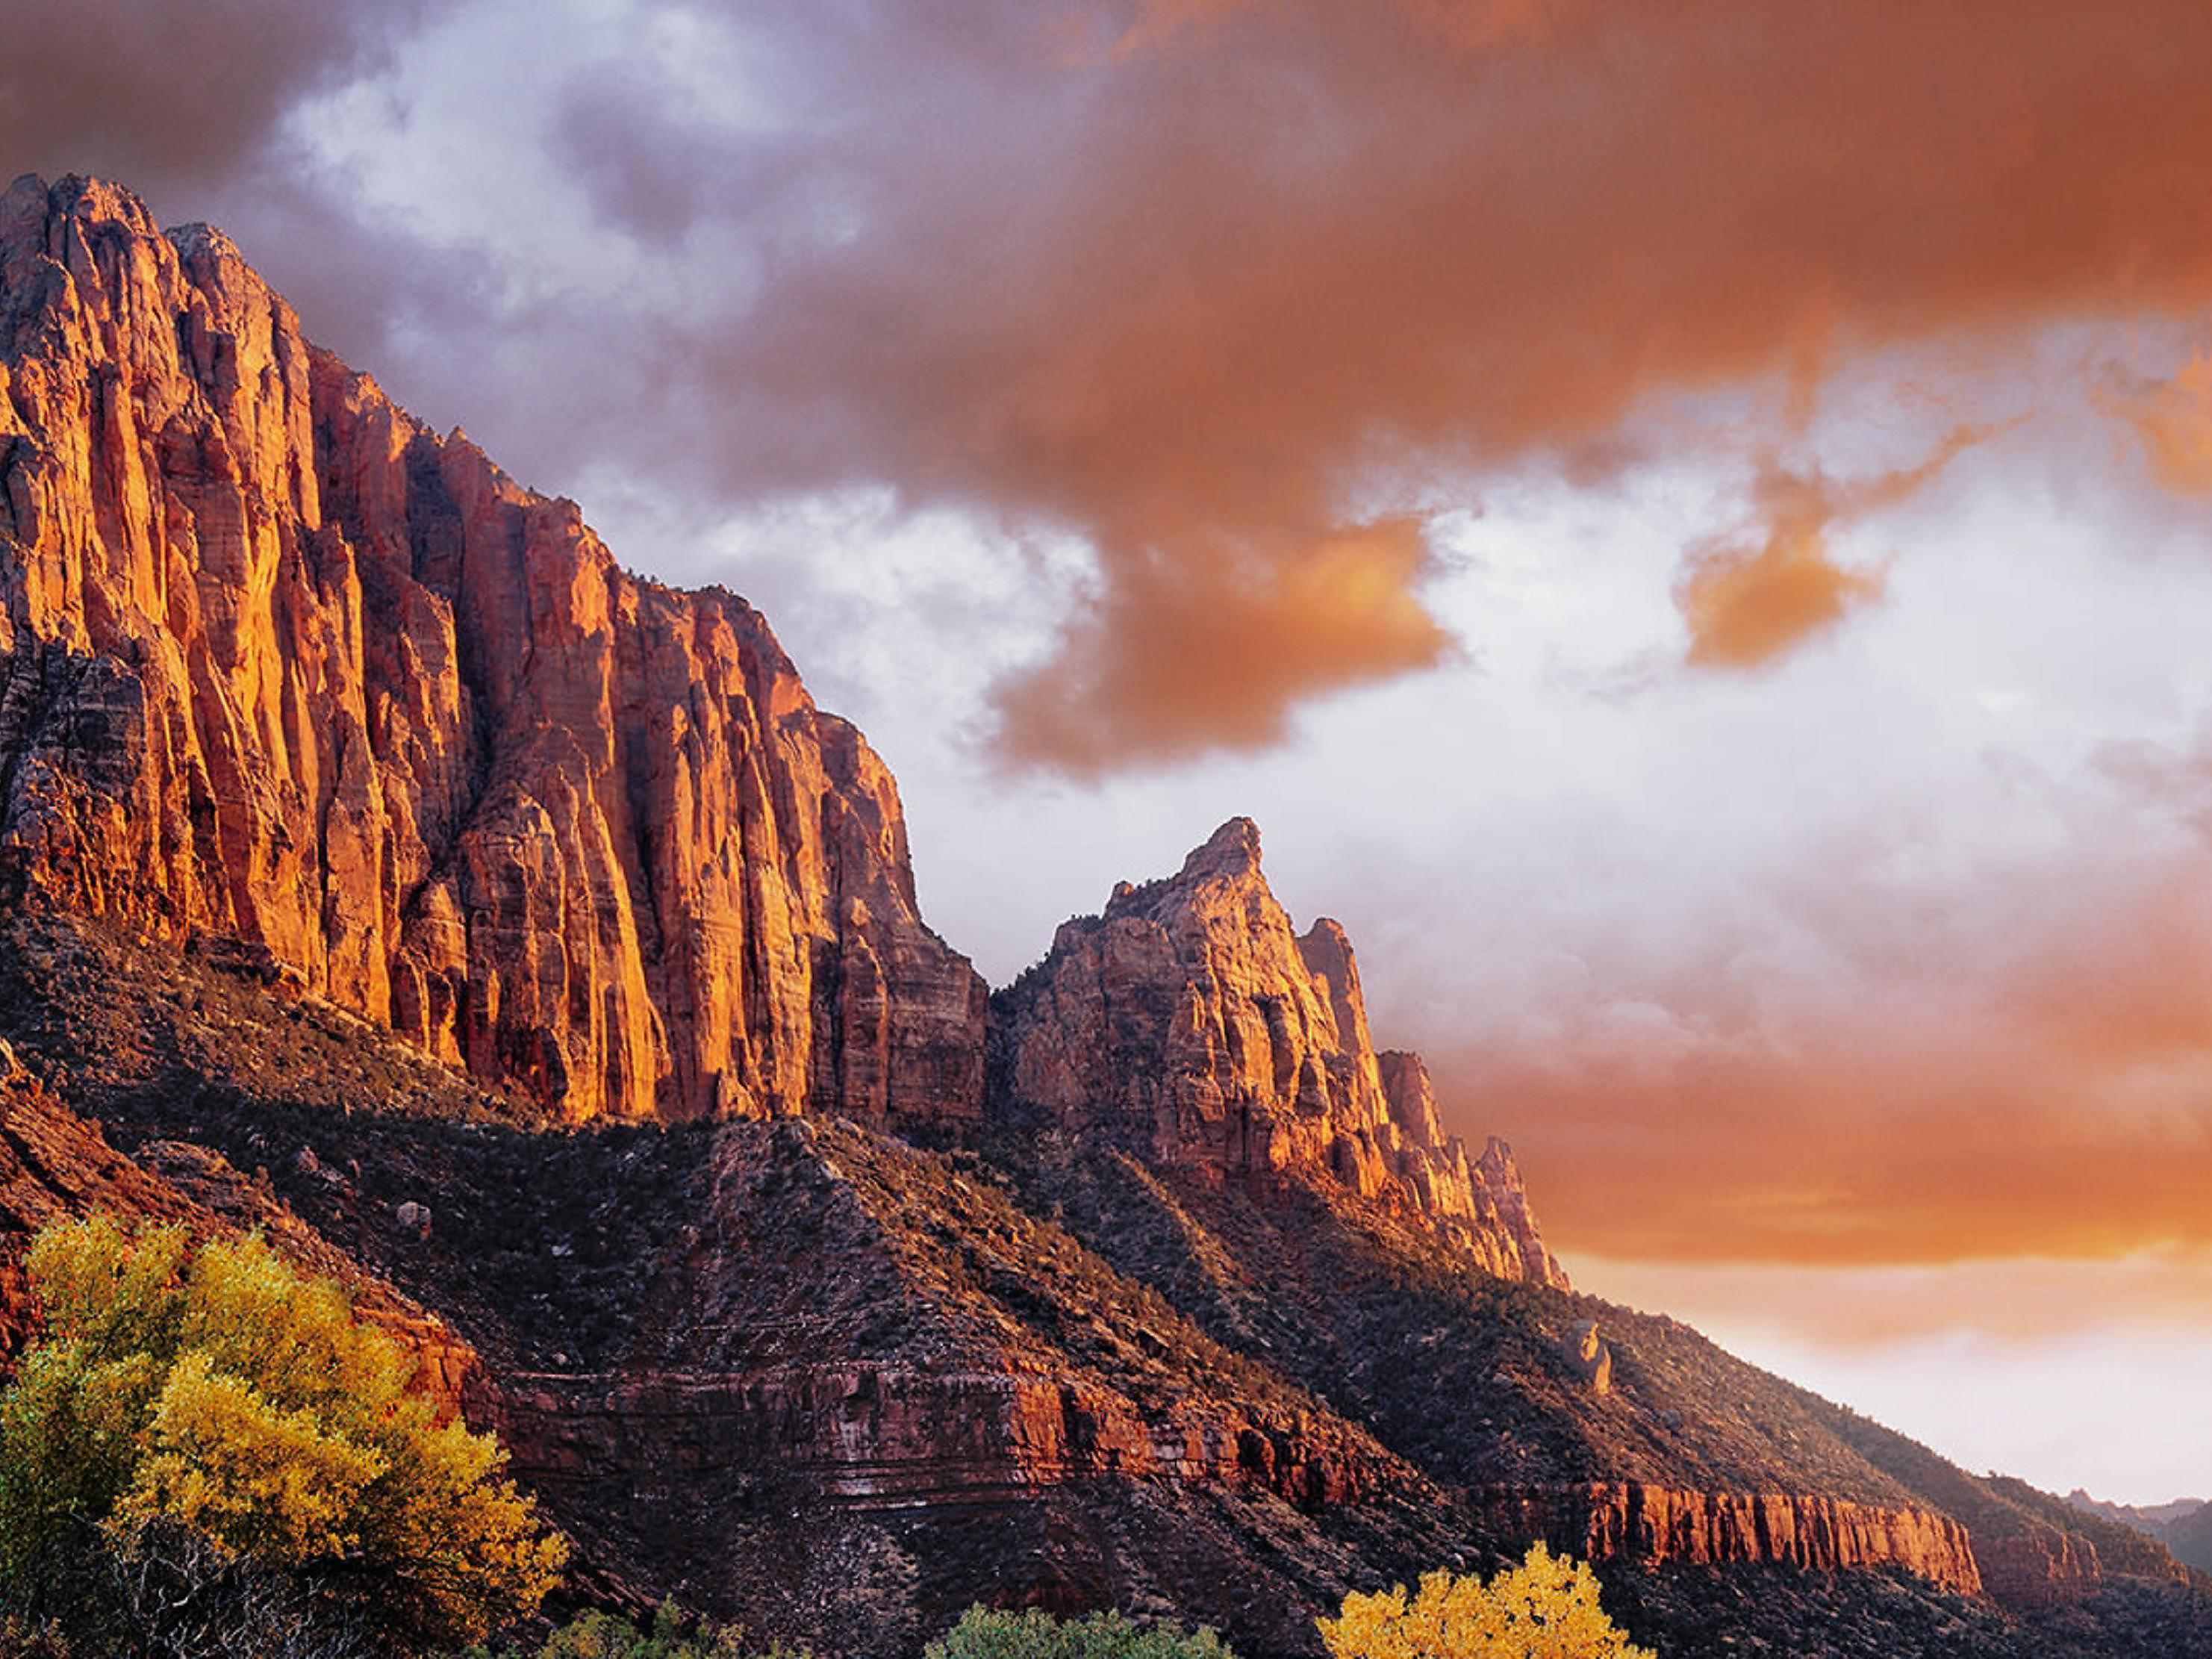 The majestic Watchman at dusk in Zion National Park